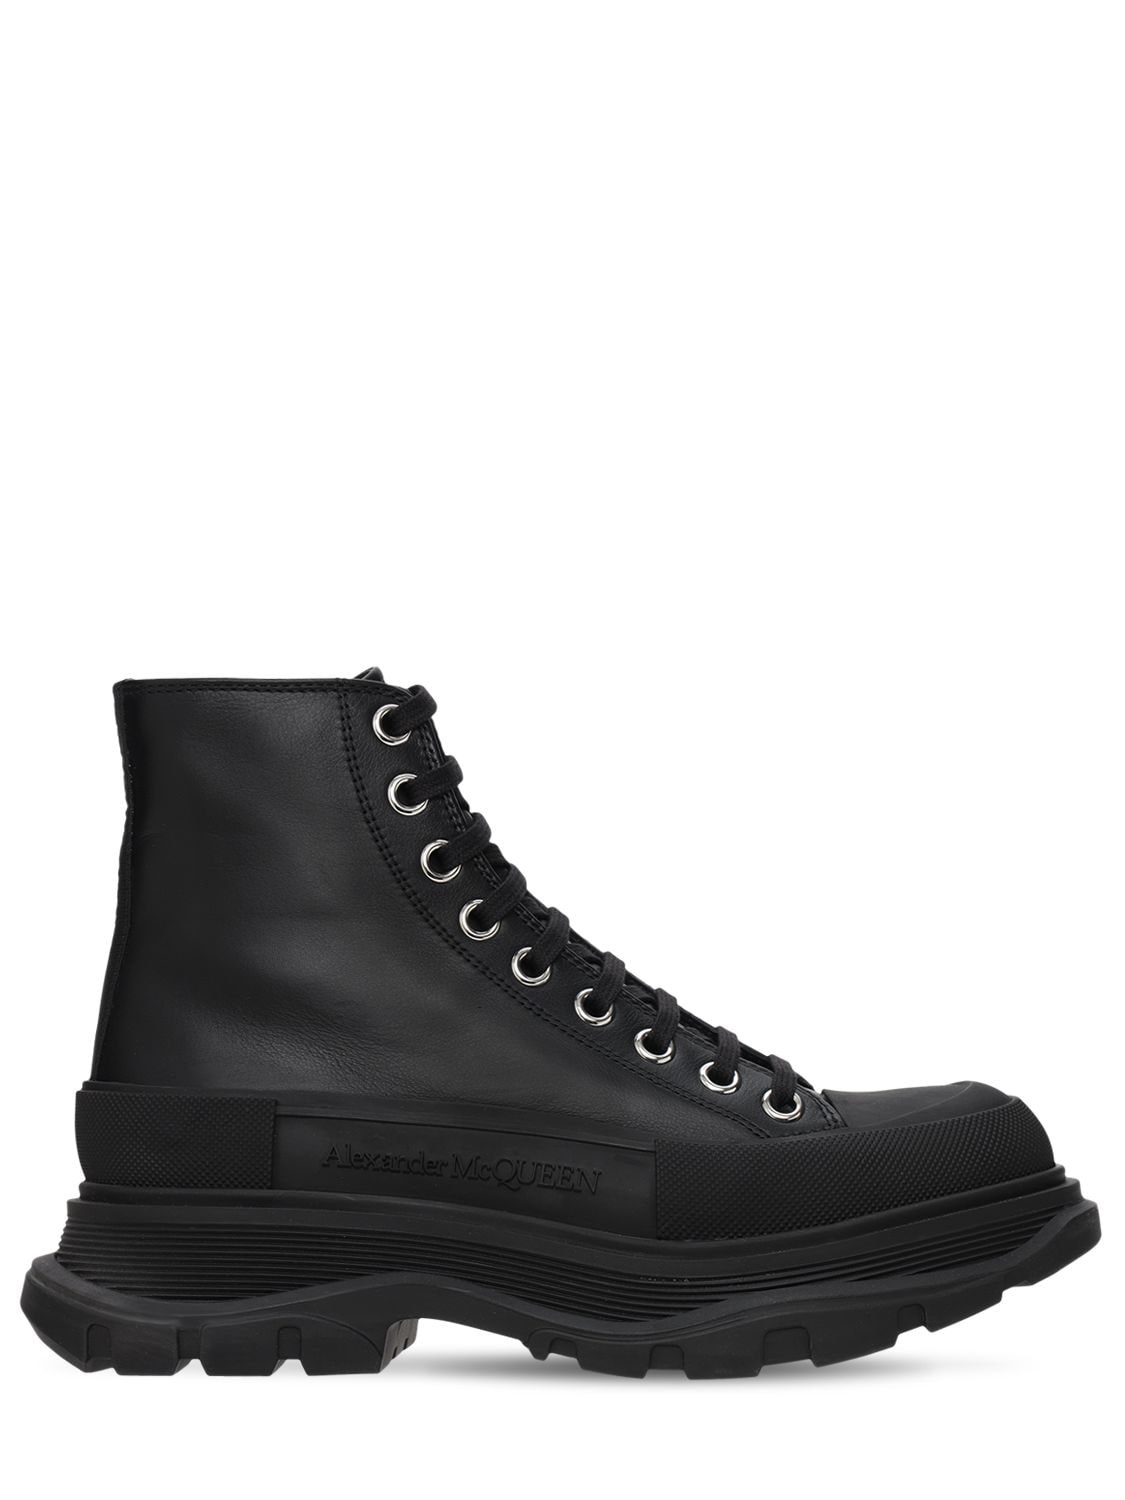 Alexander Mcqueen Tread Slick Leather Ankle Boots In Black | ModeSens